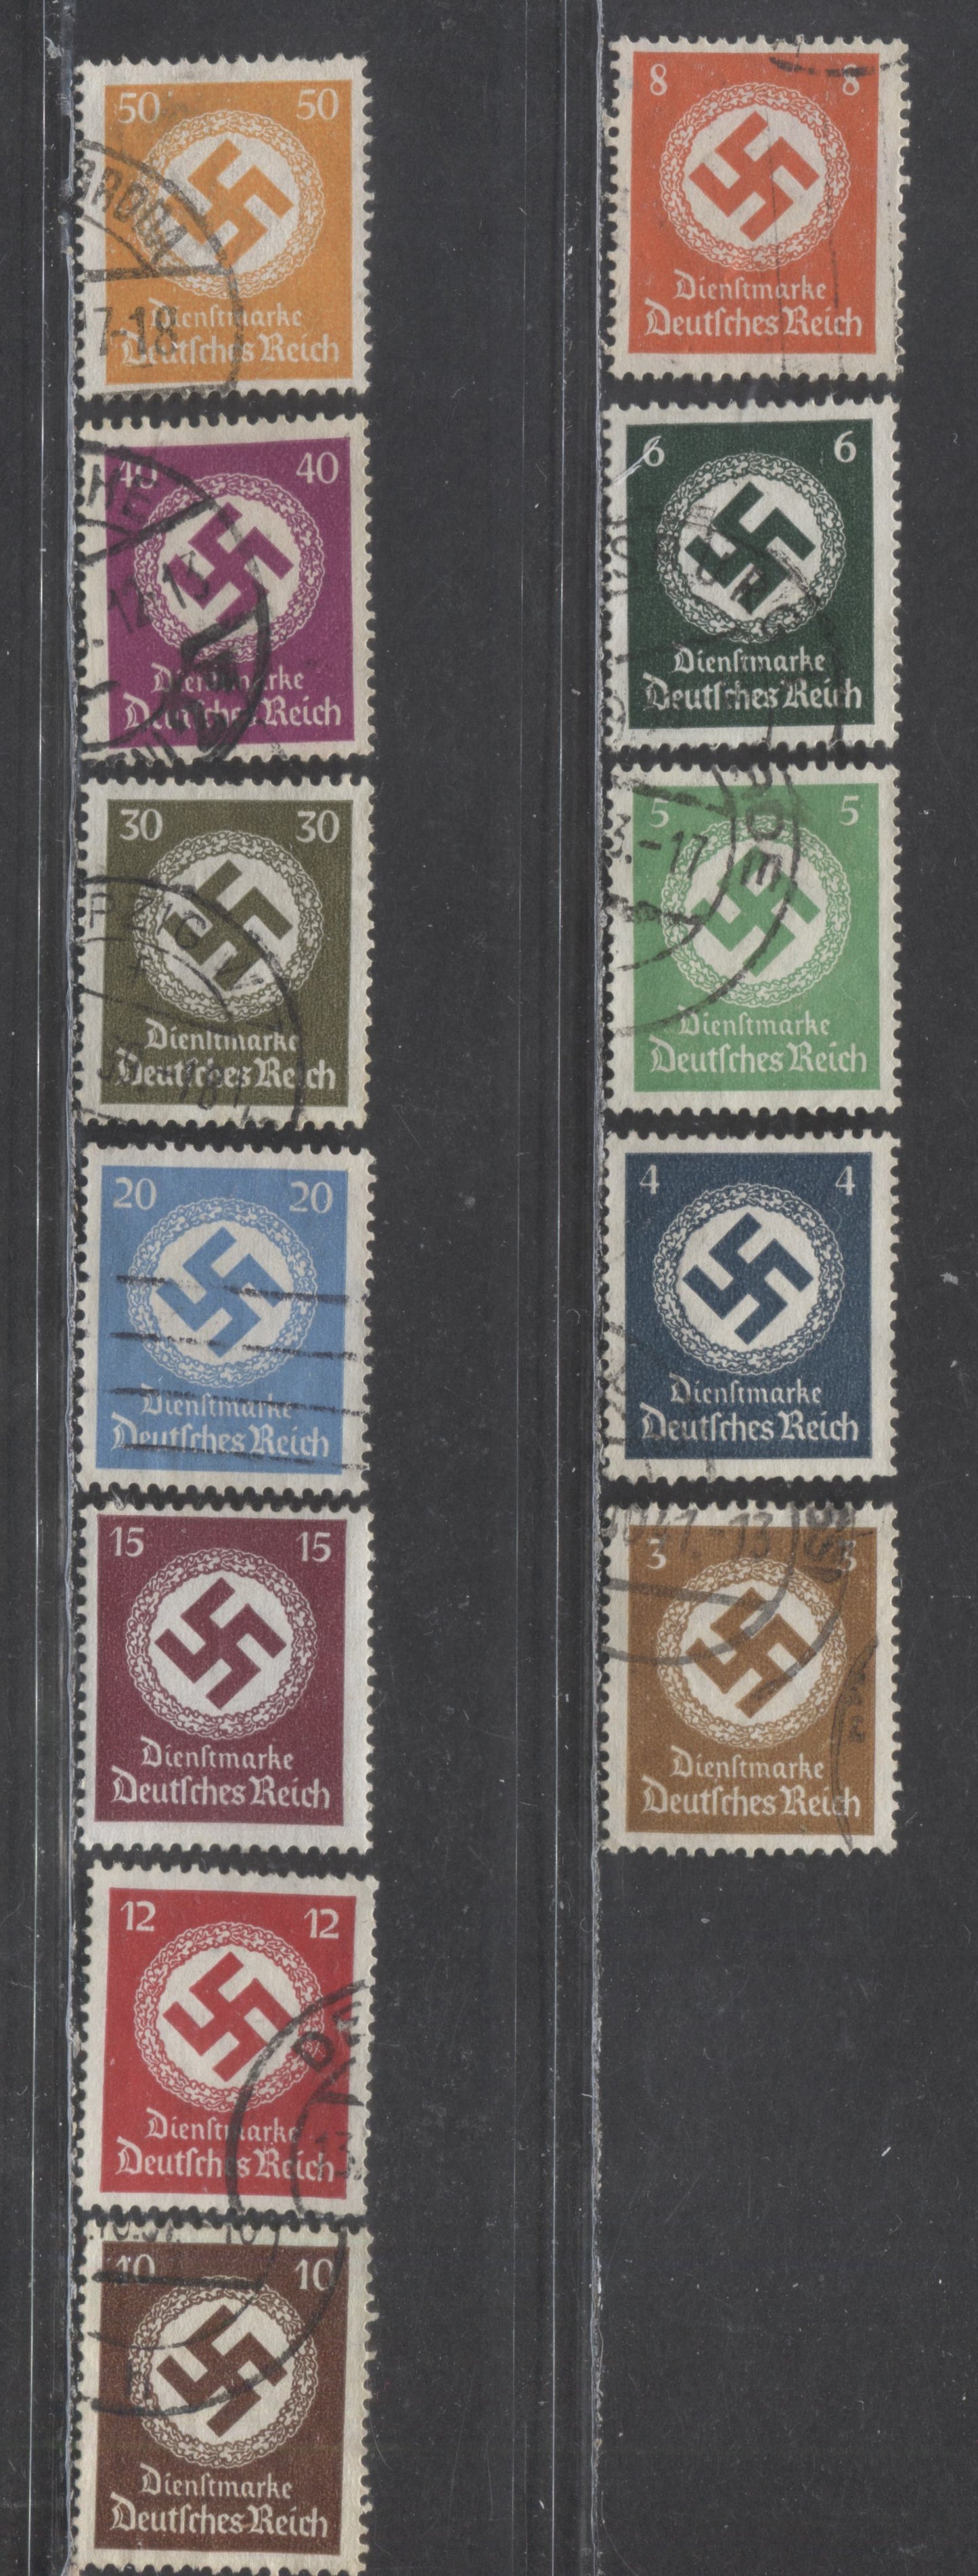 Lot 279 Germany SC#O80-O91 1934 Officials, 12 Fine/Very Fine Used & OG Singles, Click on Listing to See ALL Pictures, 2022 Scott Classic Cat. $23.35 USD